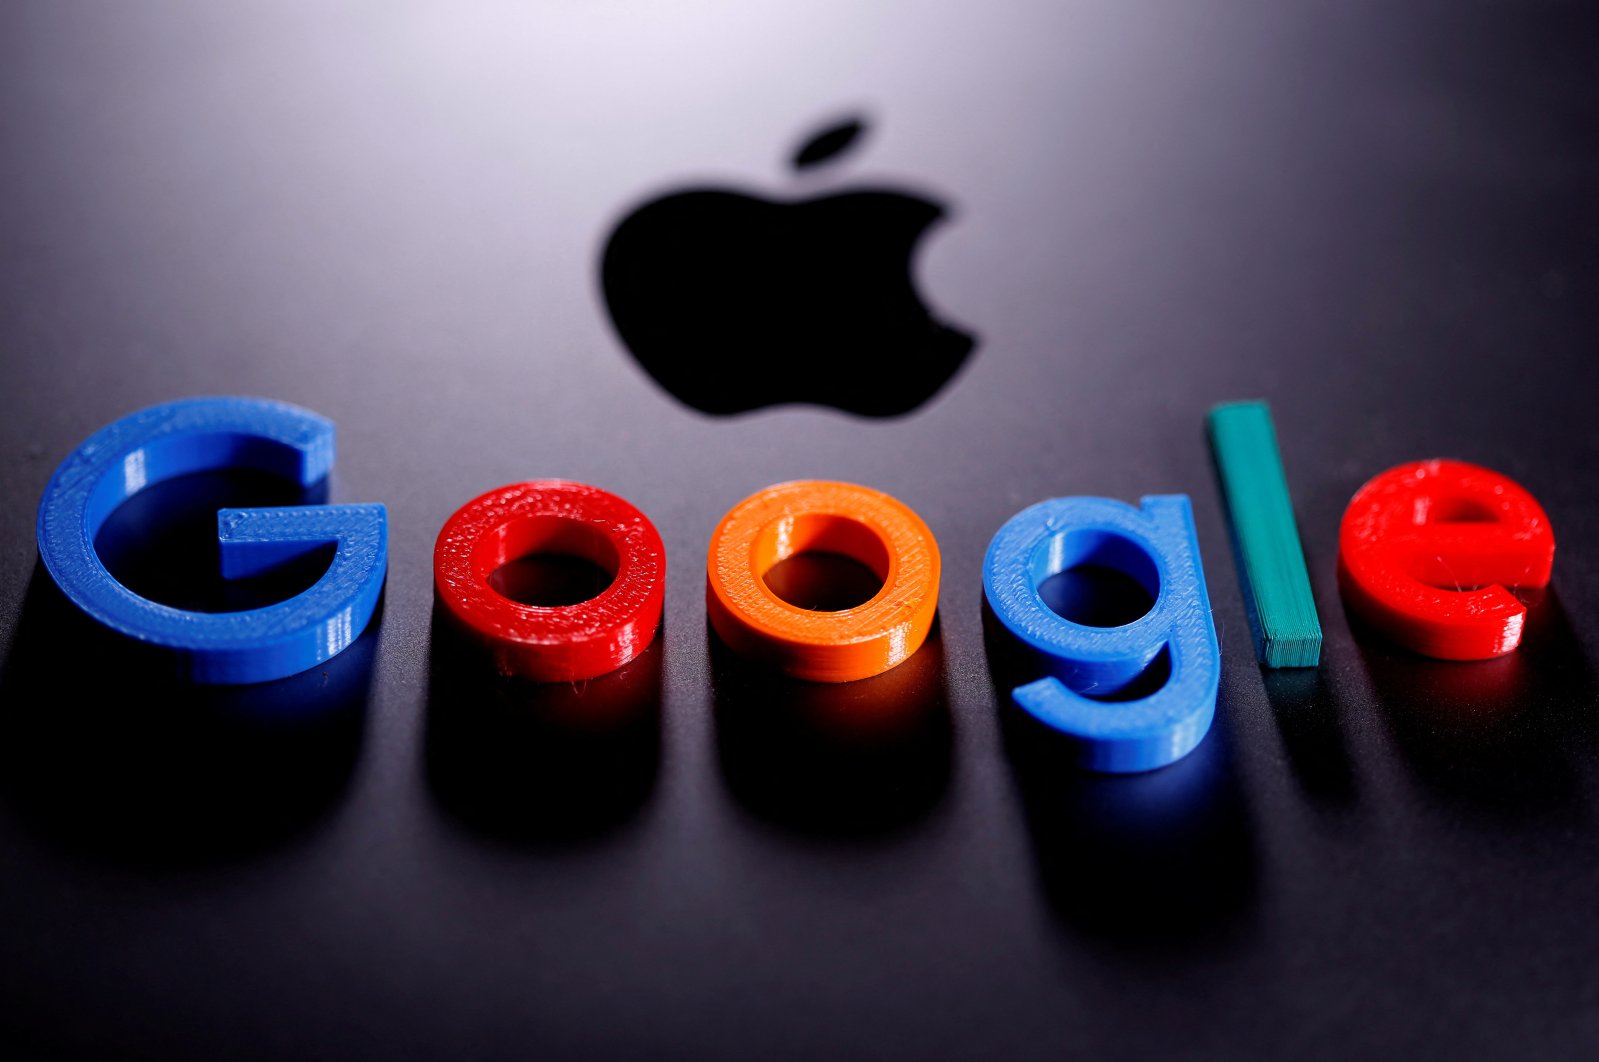 A 3D printed Google logo is placed on the Apple Macbook in this illustration taken April 12, 2020. (Reuters Photo)